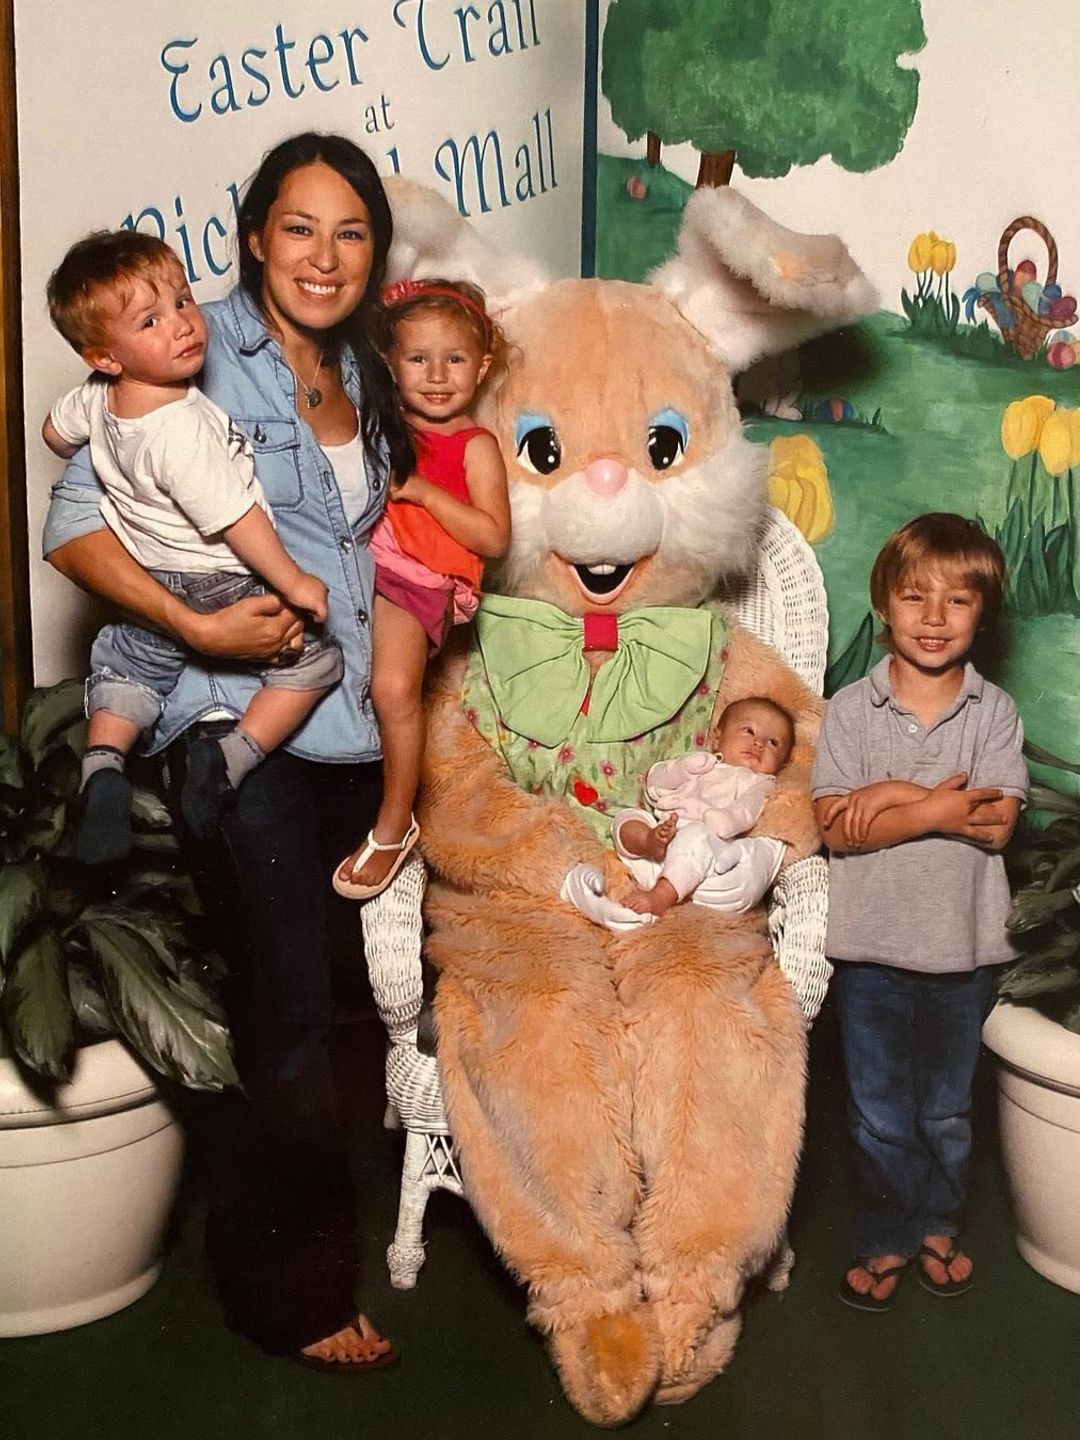 Joanna holding two children in her arms stood next to a person in an Easter Bunny costume who is sat next to Drake, and holding a baby Emmie